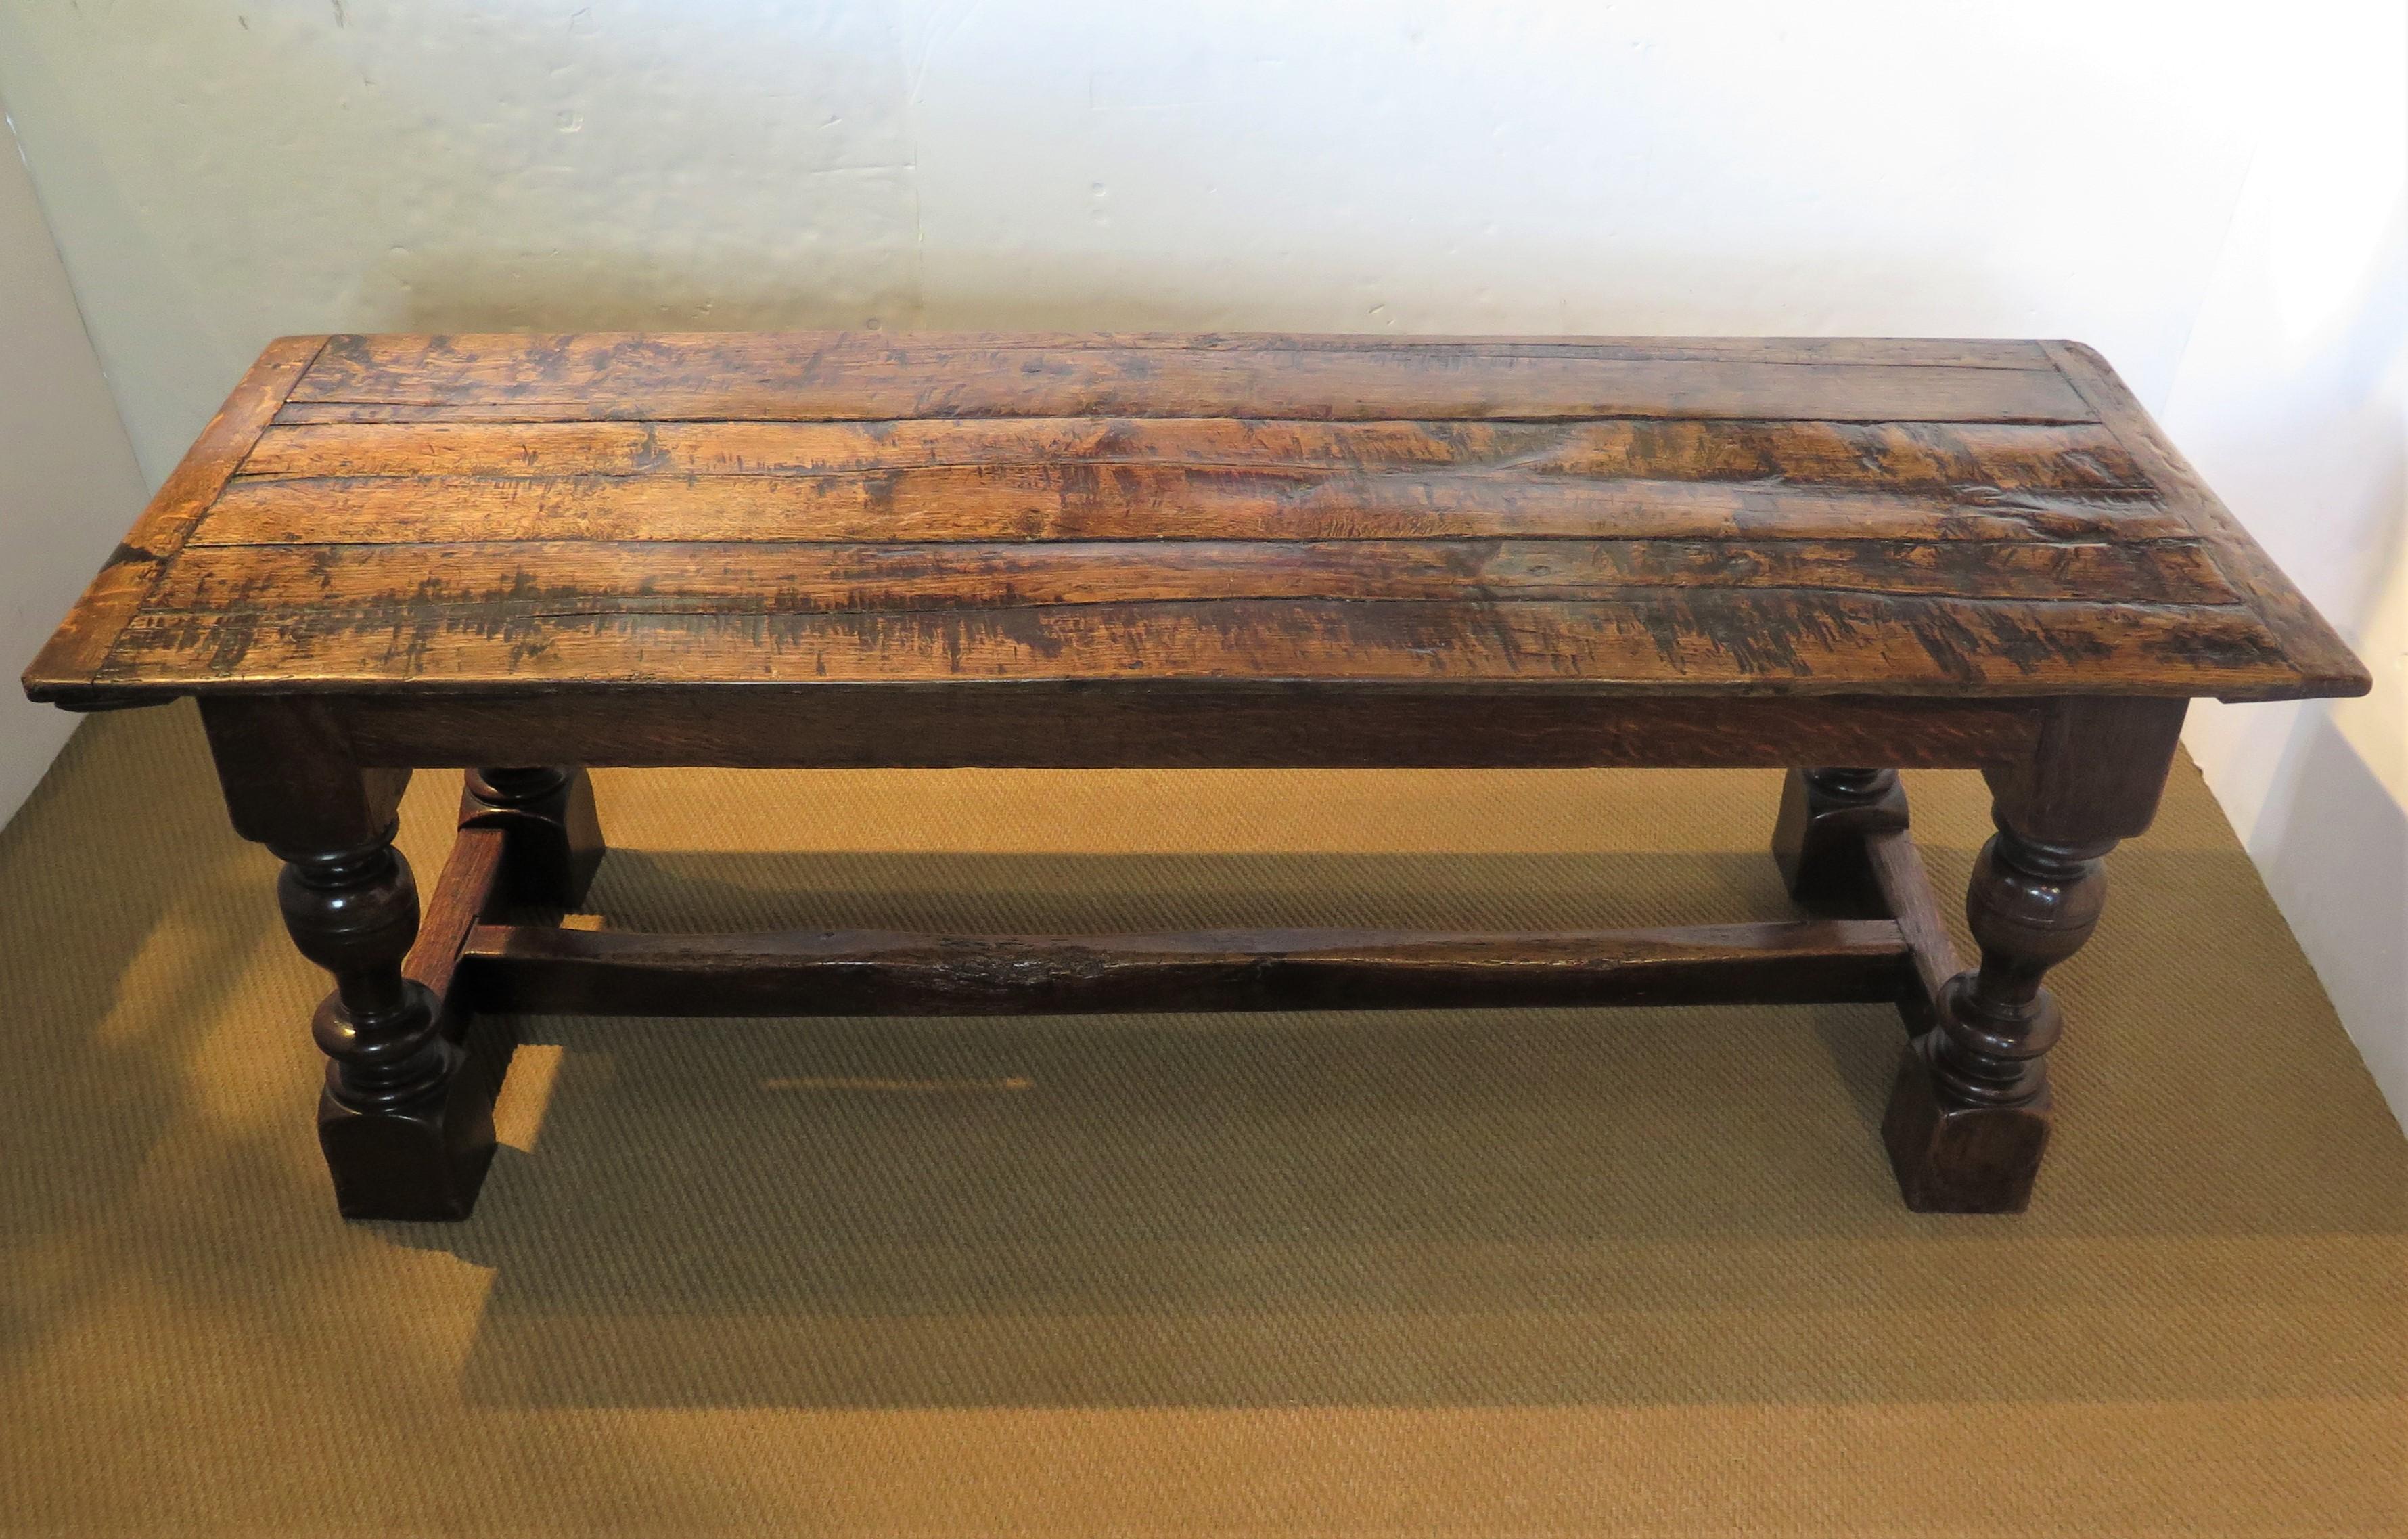 ENGLISH OAK REFRACTORY or LONG TABLE, three (3) plank top, turned legs, “H” stretcher, England, 17th century

beautiful original finish with excellent patination

29.75” H x 89.75” L x 32.25” W

PROVENANCE:
label on frame (see image)

The